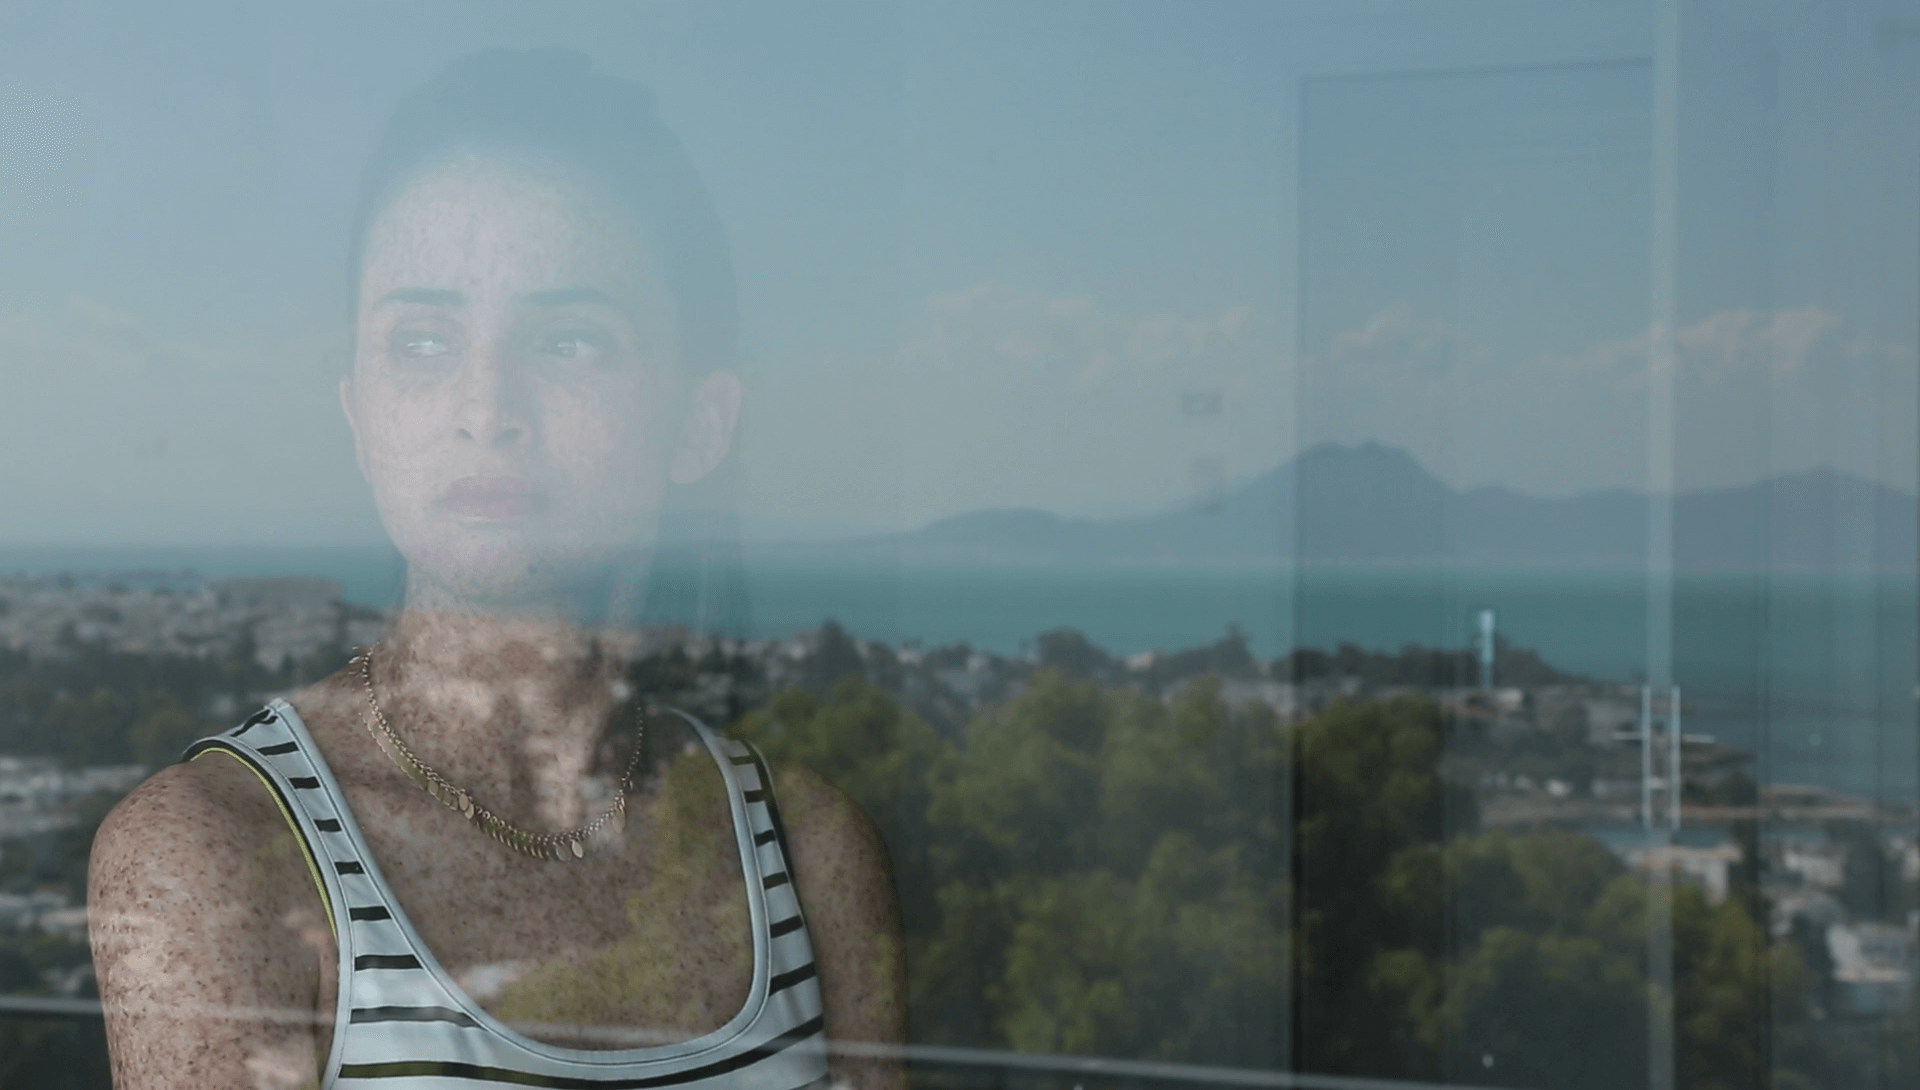 Still from Girls of the Moon. A young woman is staring through a window. She has dark hair, pulled back into a ponytail. She is wearing pink lipstick, a black and white striped tank top, and a gold necklace. She is heavily freckled. In the reflection of the glass is seen a city, water, and mountains.